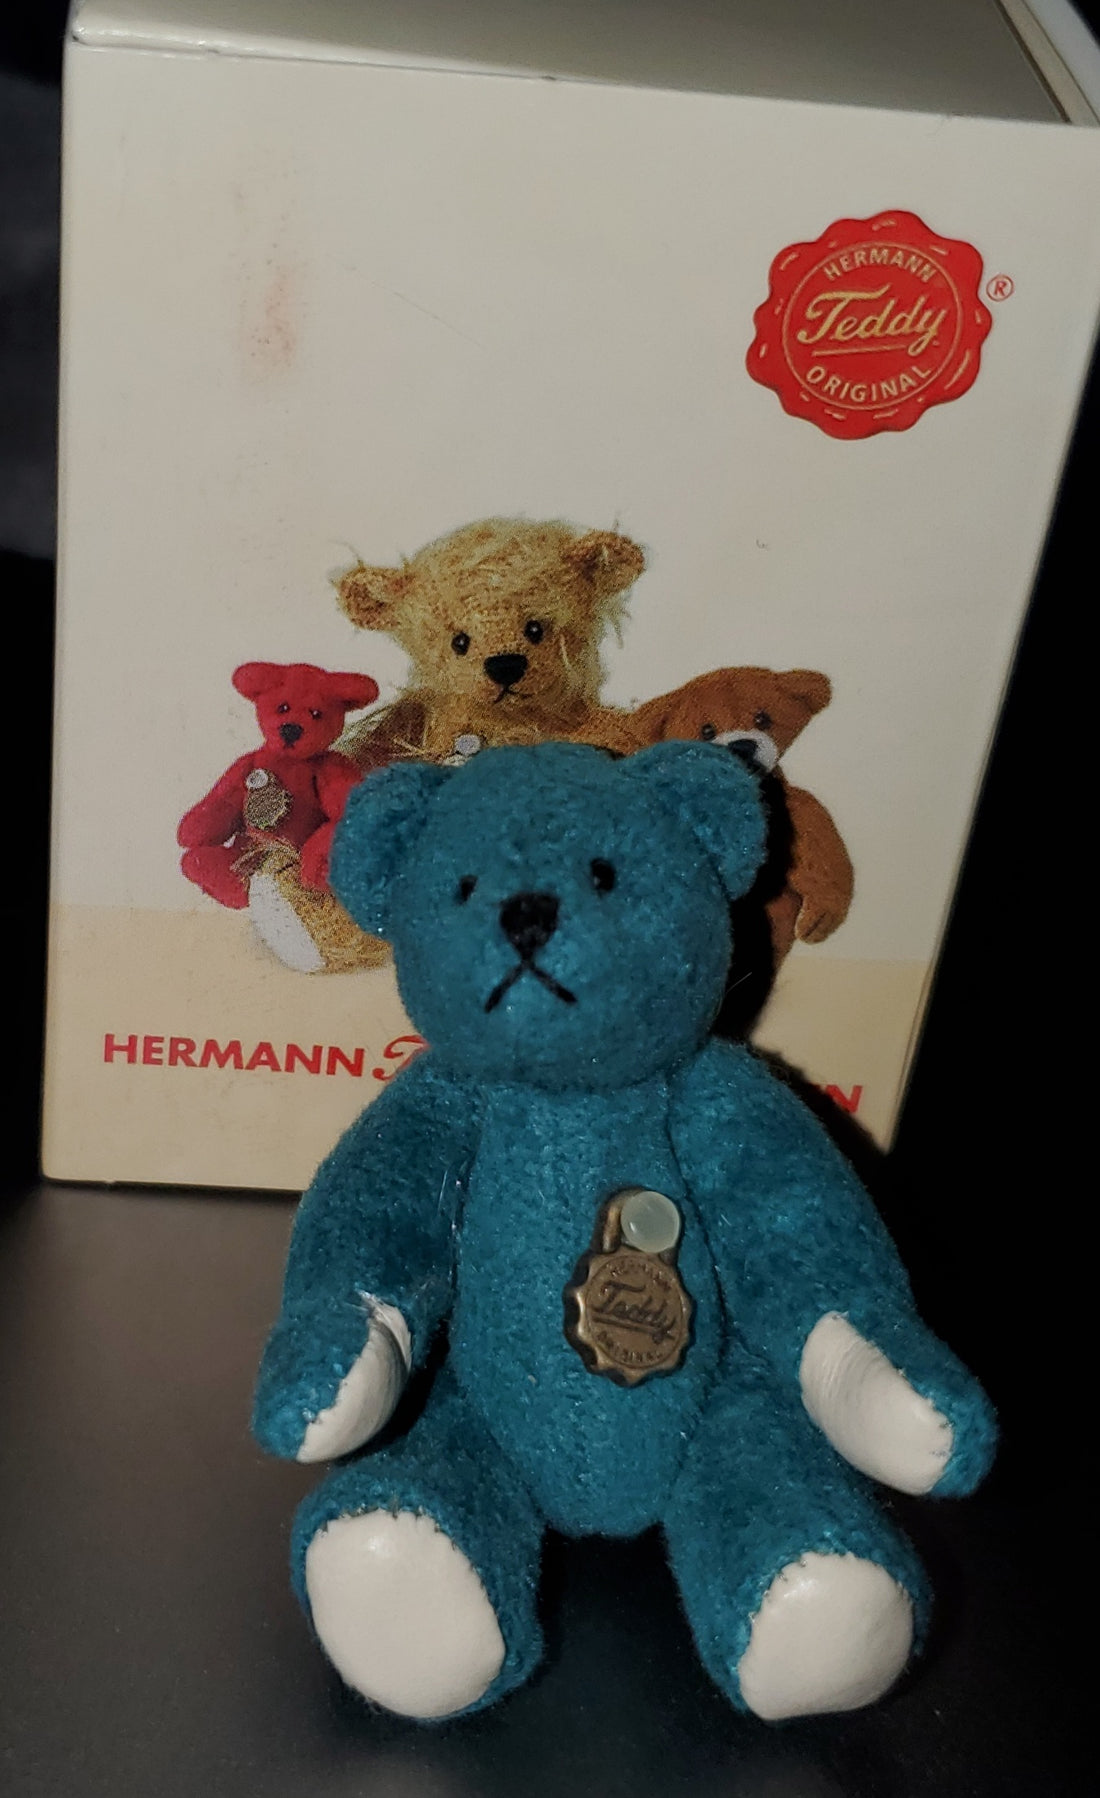 Tourquoise Miniature 2.4" Teddy Bear by Hermann of Germany